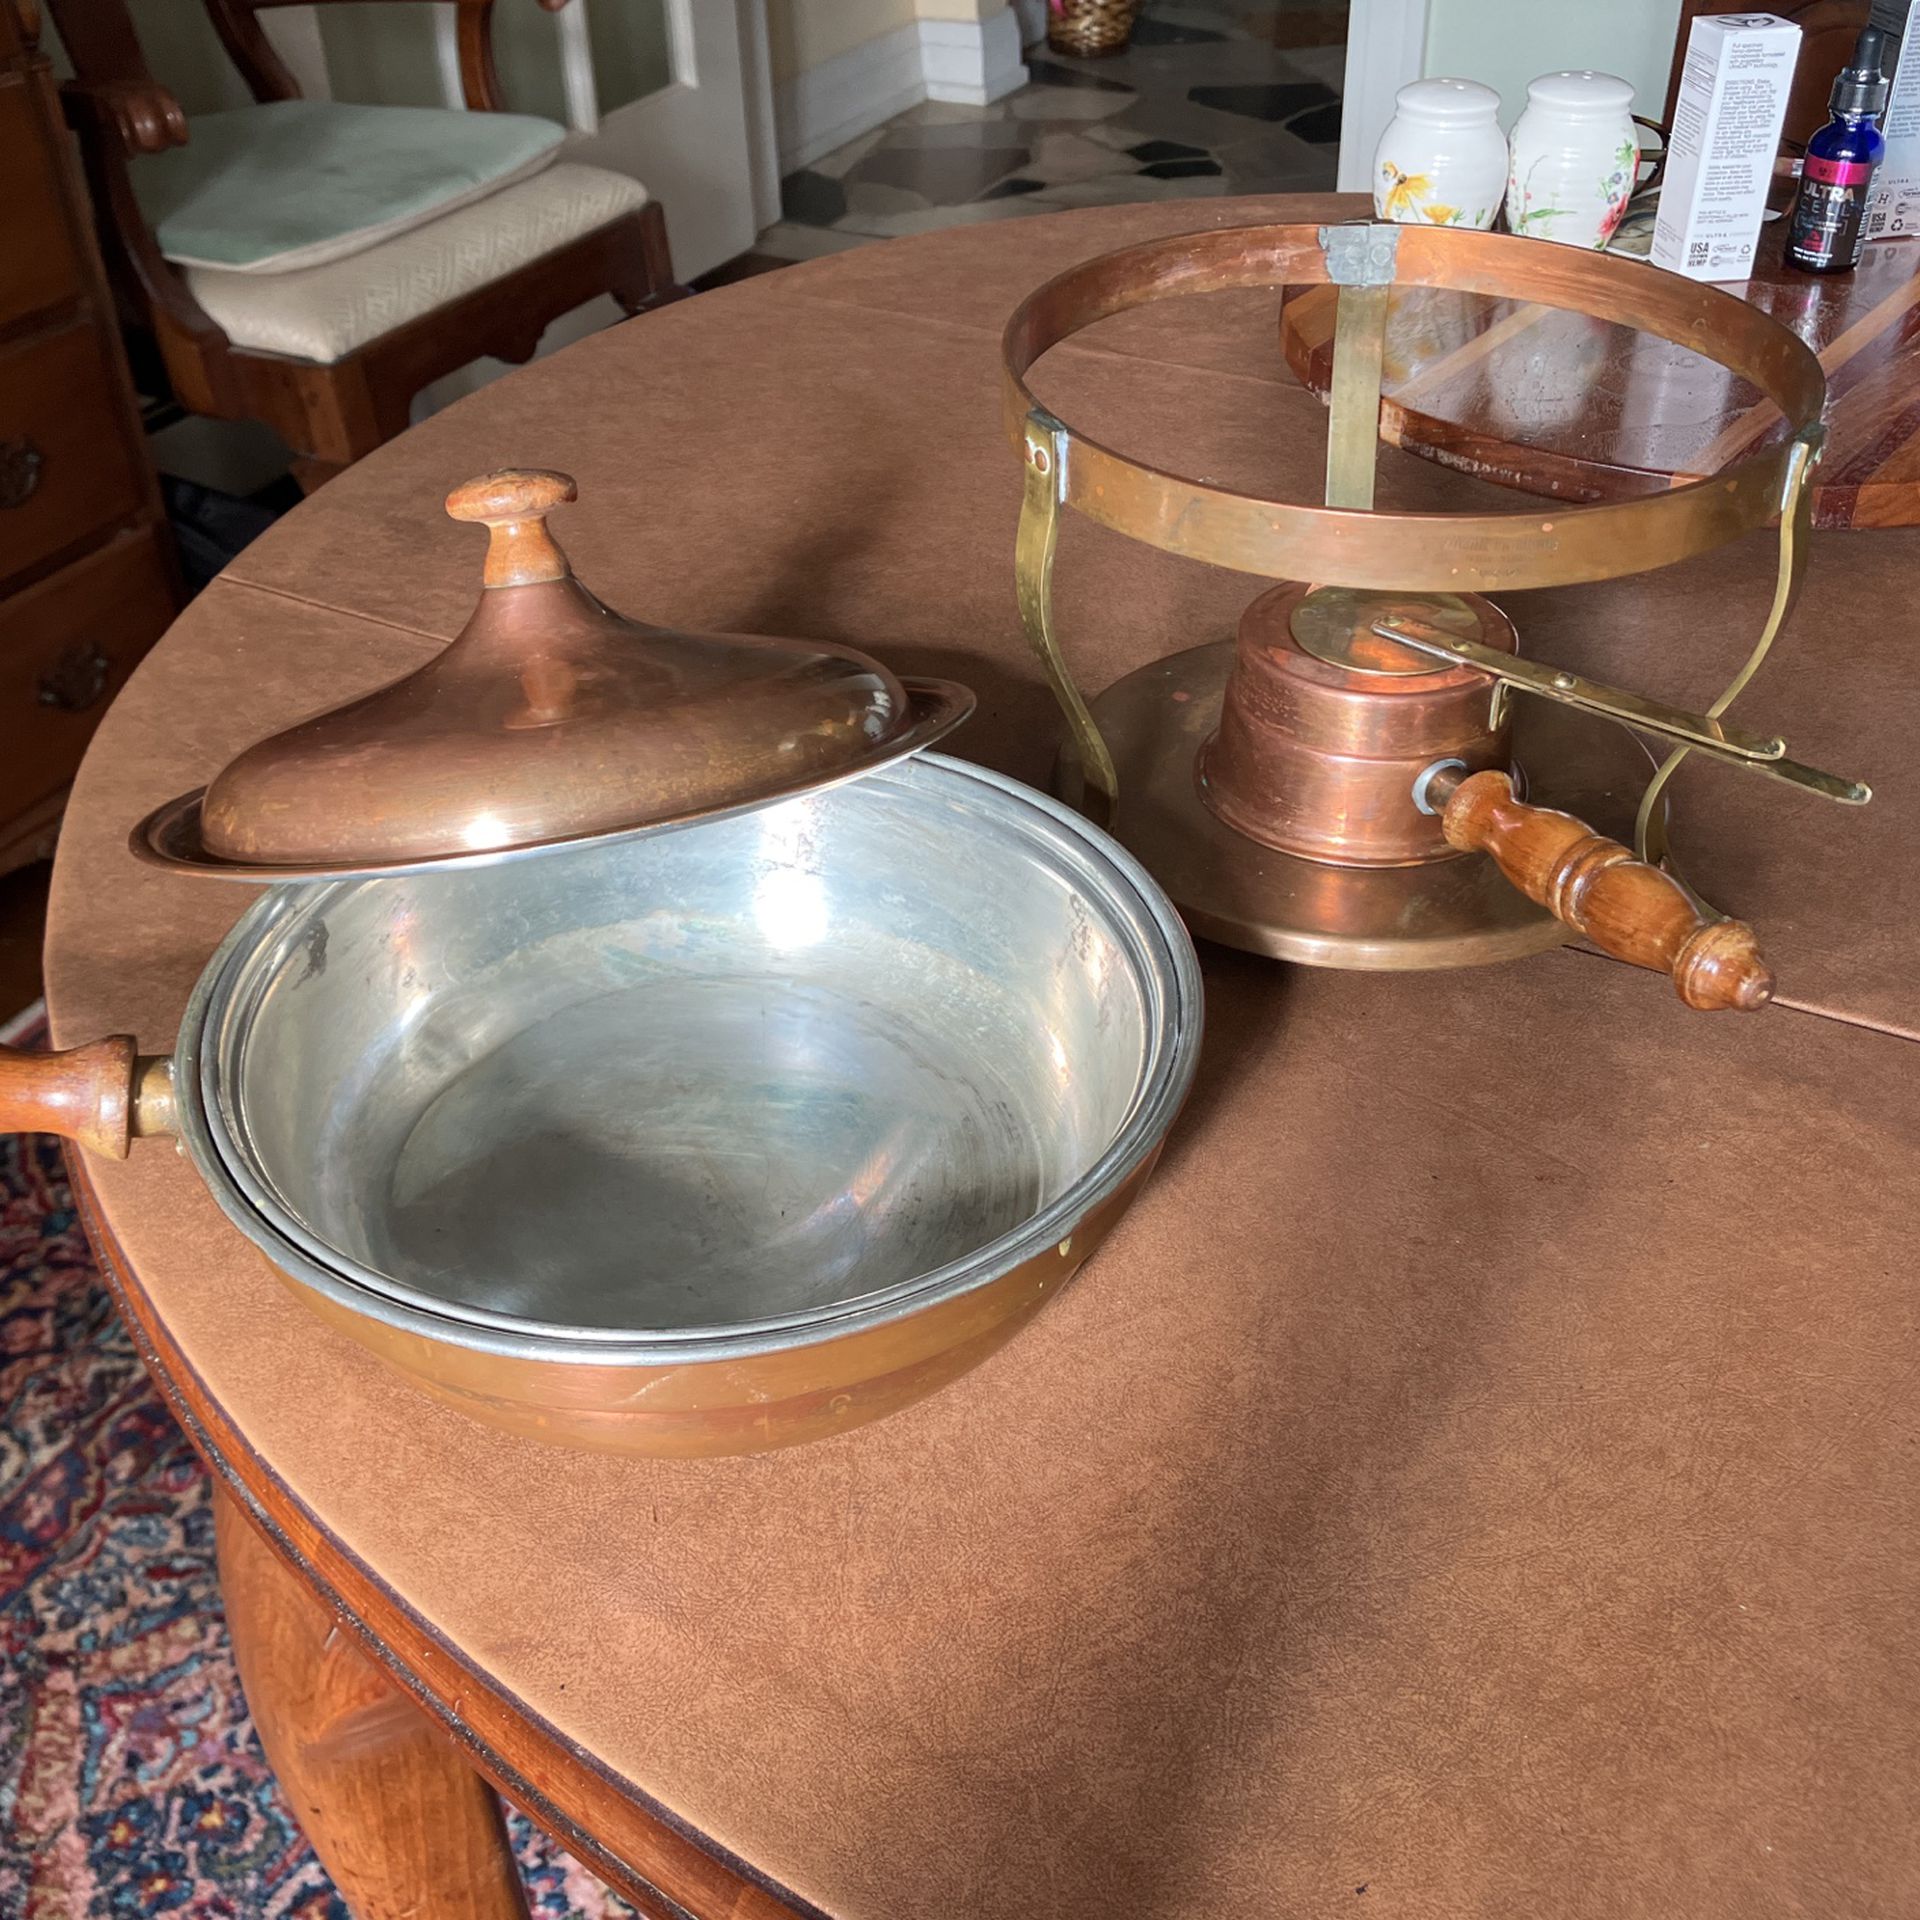 Warming Dishes/chafing dishes, a pair